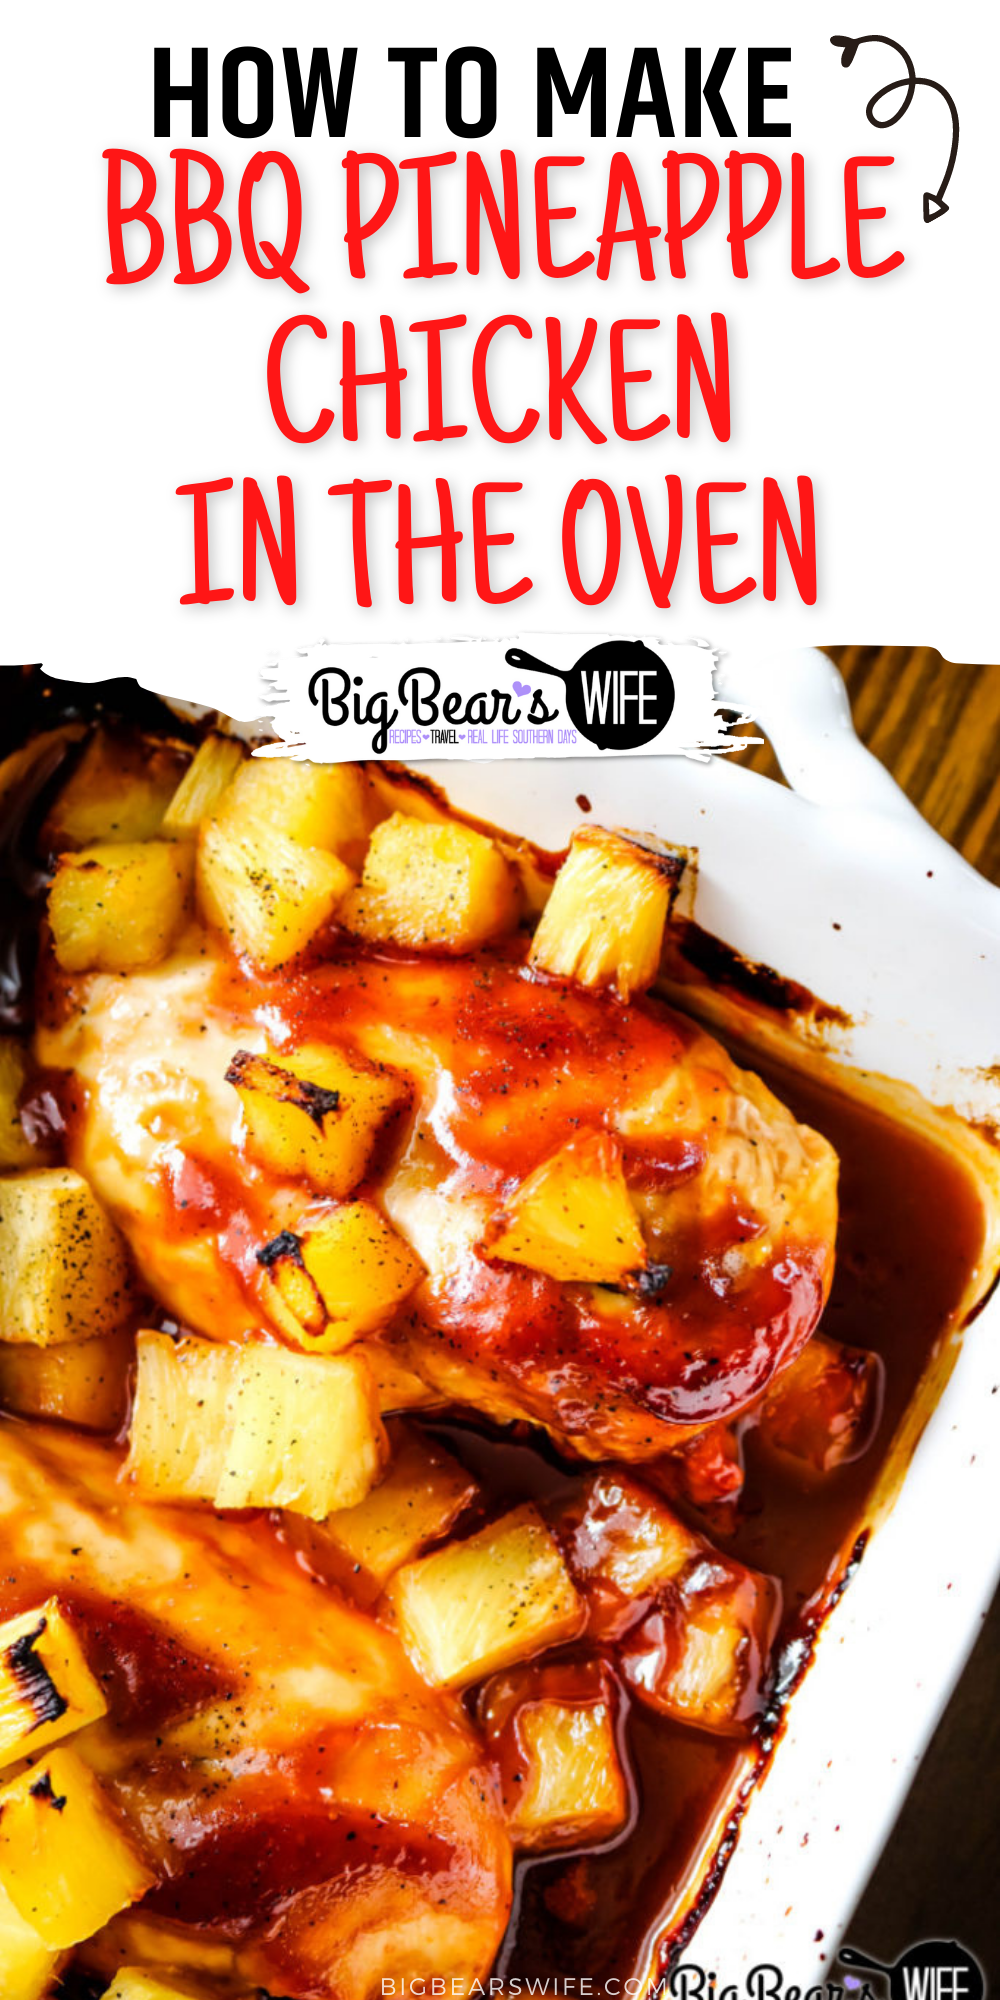 Learn how to make Pineapple BBQ Chicken in the oven! It's perfect as a main dish and also great to shred for Chicken sandwiches and tacos! Leave out the pineapple and it's the perfect Oven baked BBQ chicken.  via @bigbearswife